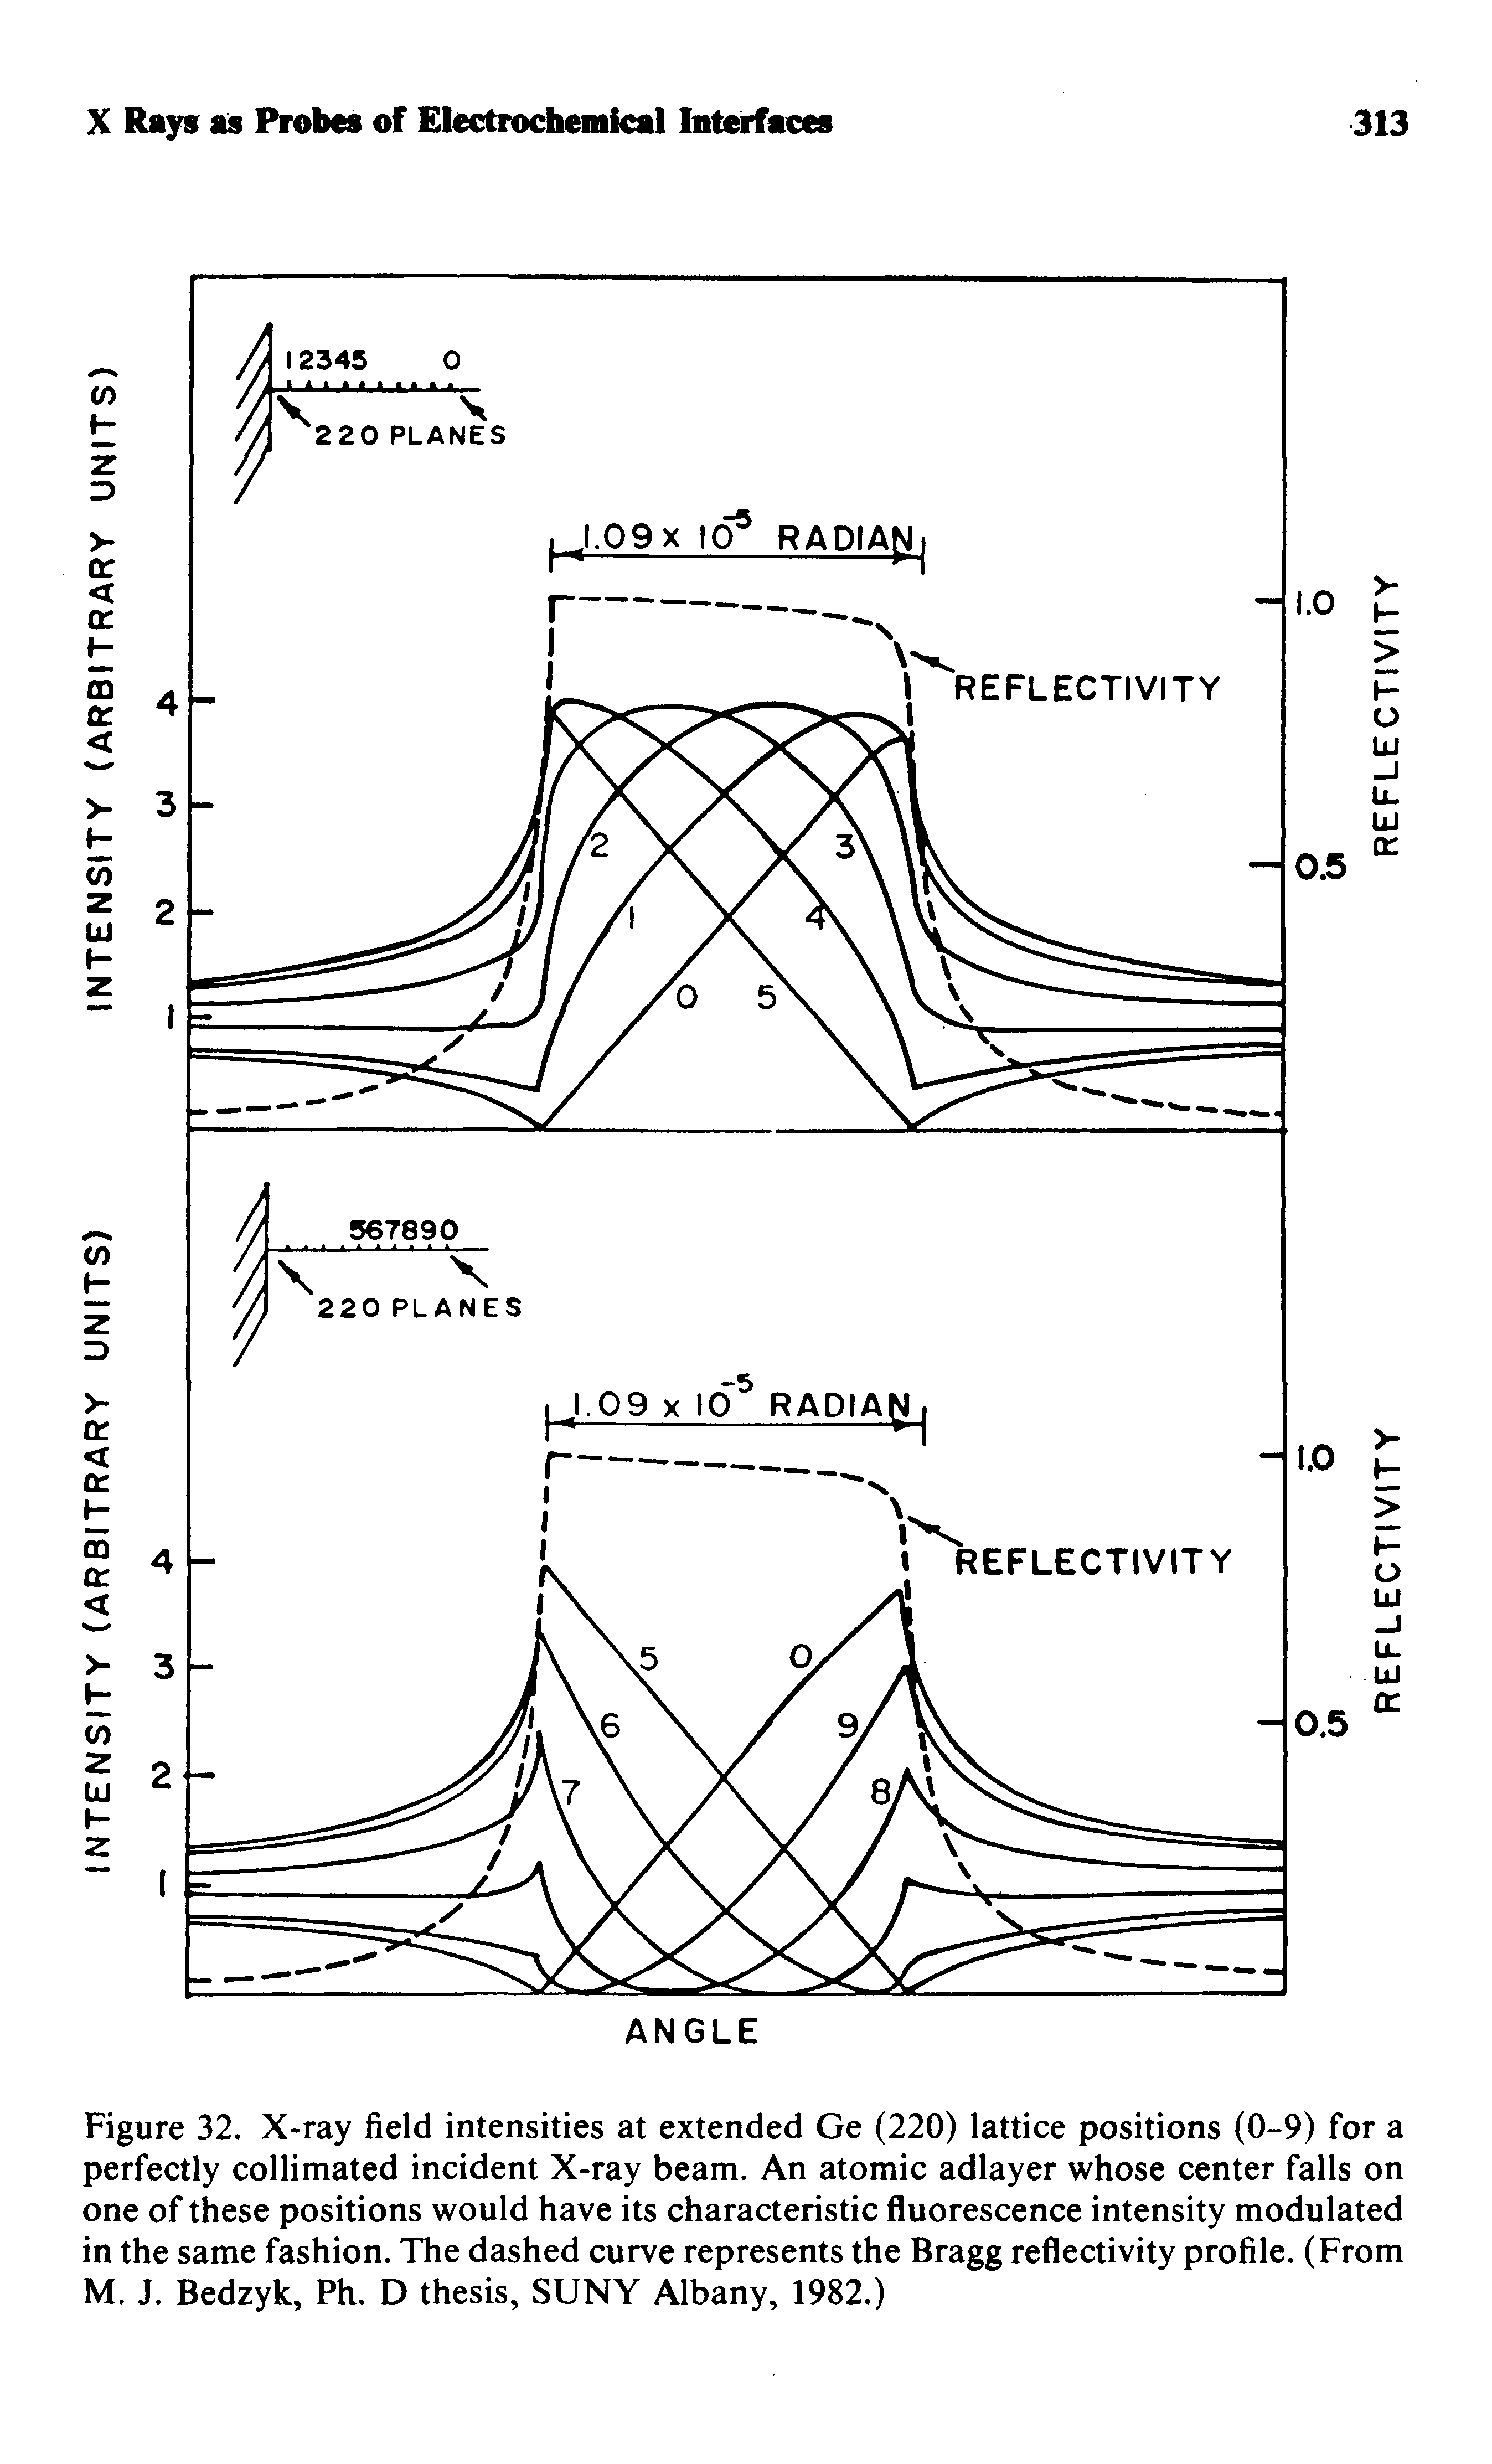 Figure 32. X-ray field intensities at extended Ge (220) lattice positions (0-9) for a perfectly collimated incident X-ray beam. An atomic adlayer whose center falls on one of these positions would have its characteristic fluorescence intensity modulated in the same fashion. The dashed curve represents the Bragg reflectivity profile. (From M. J. Bedzyk, Ph. D thesis, SUNY Albany, 1982.)...